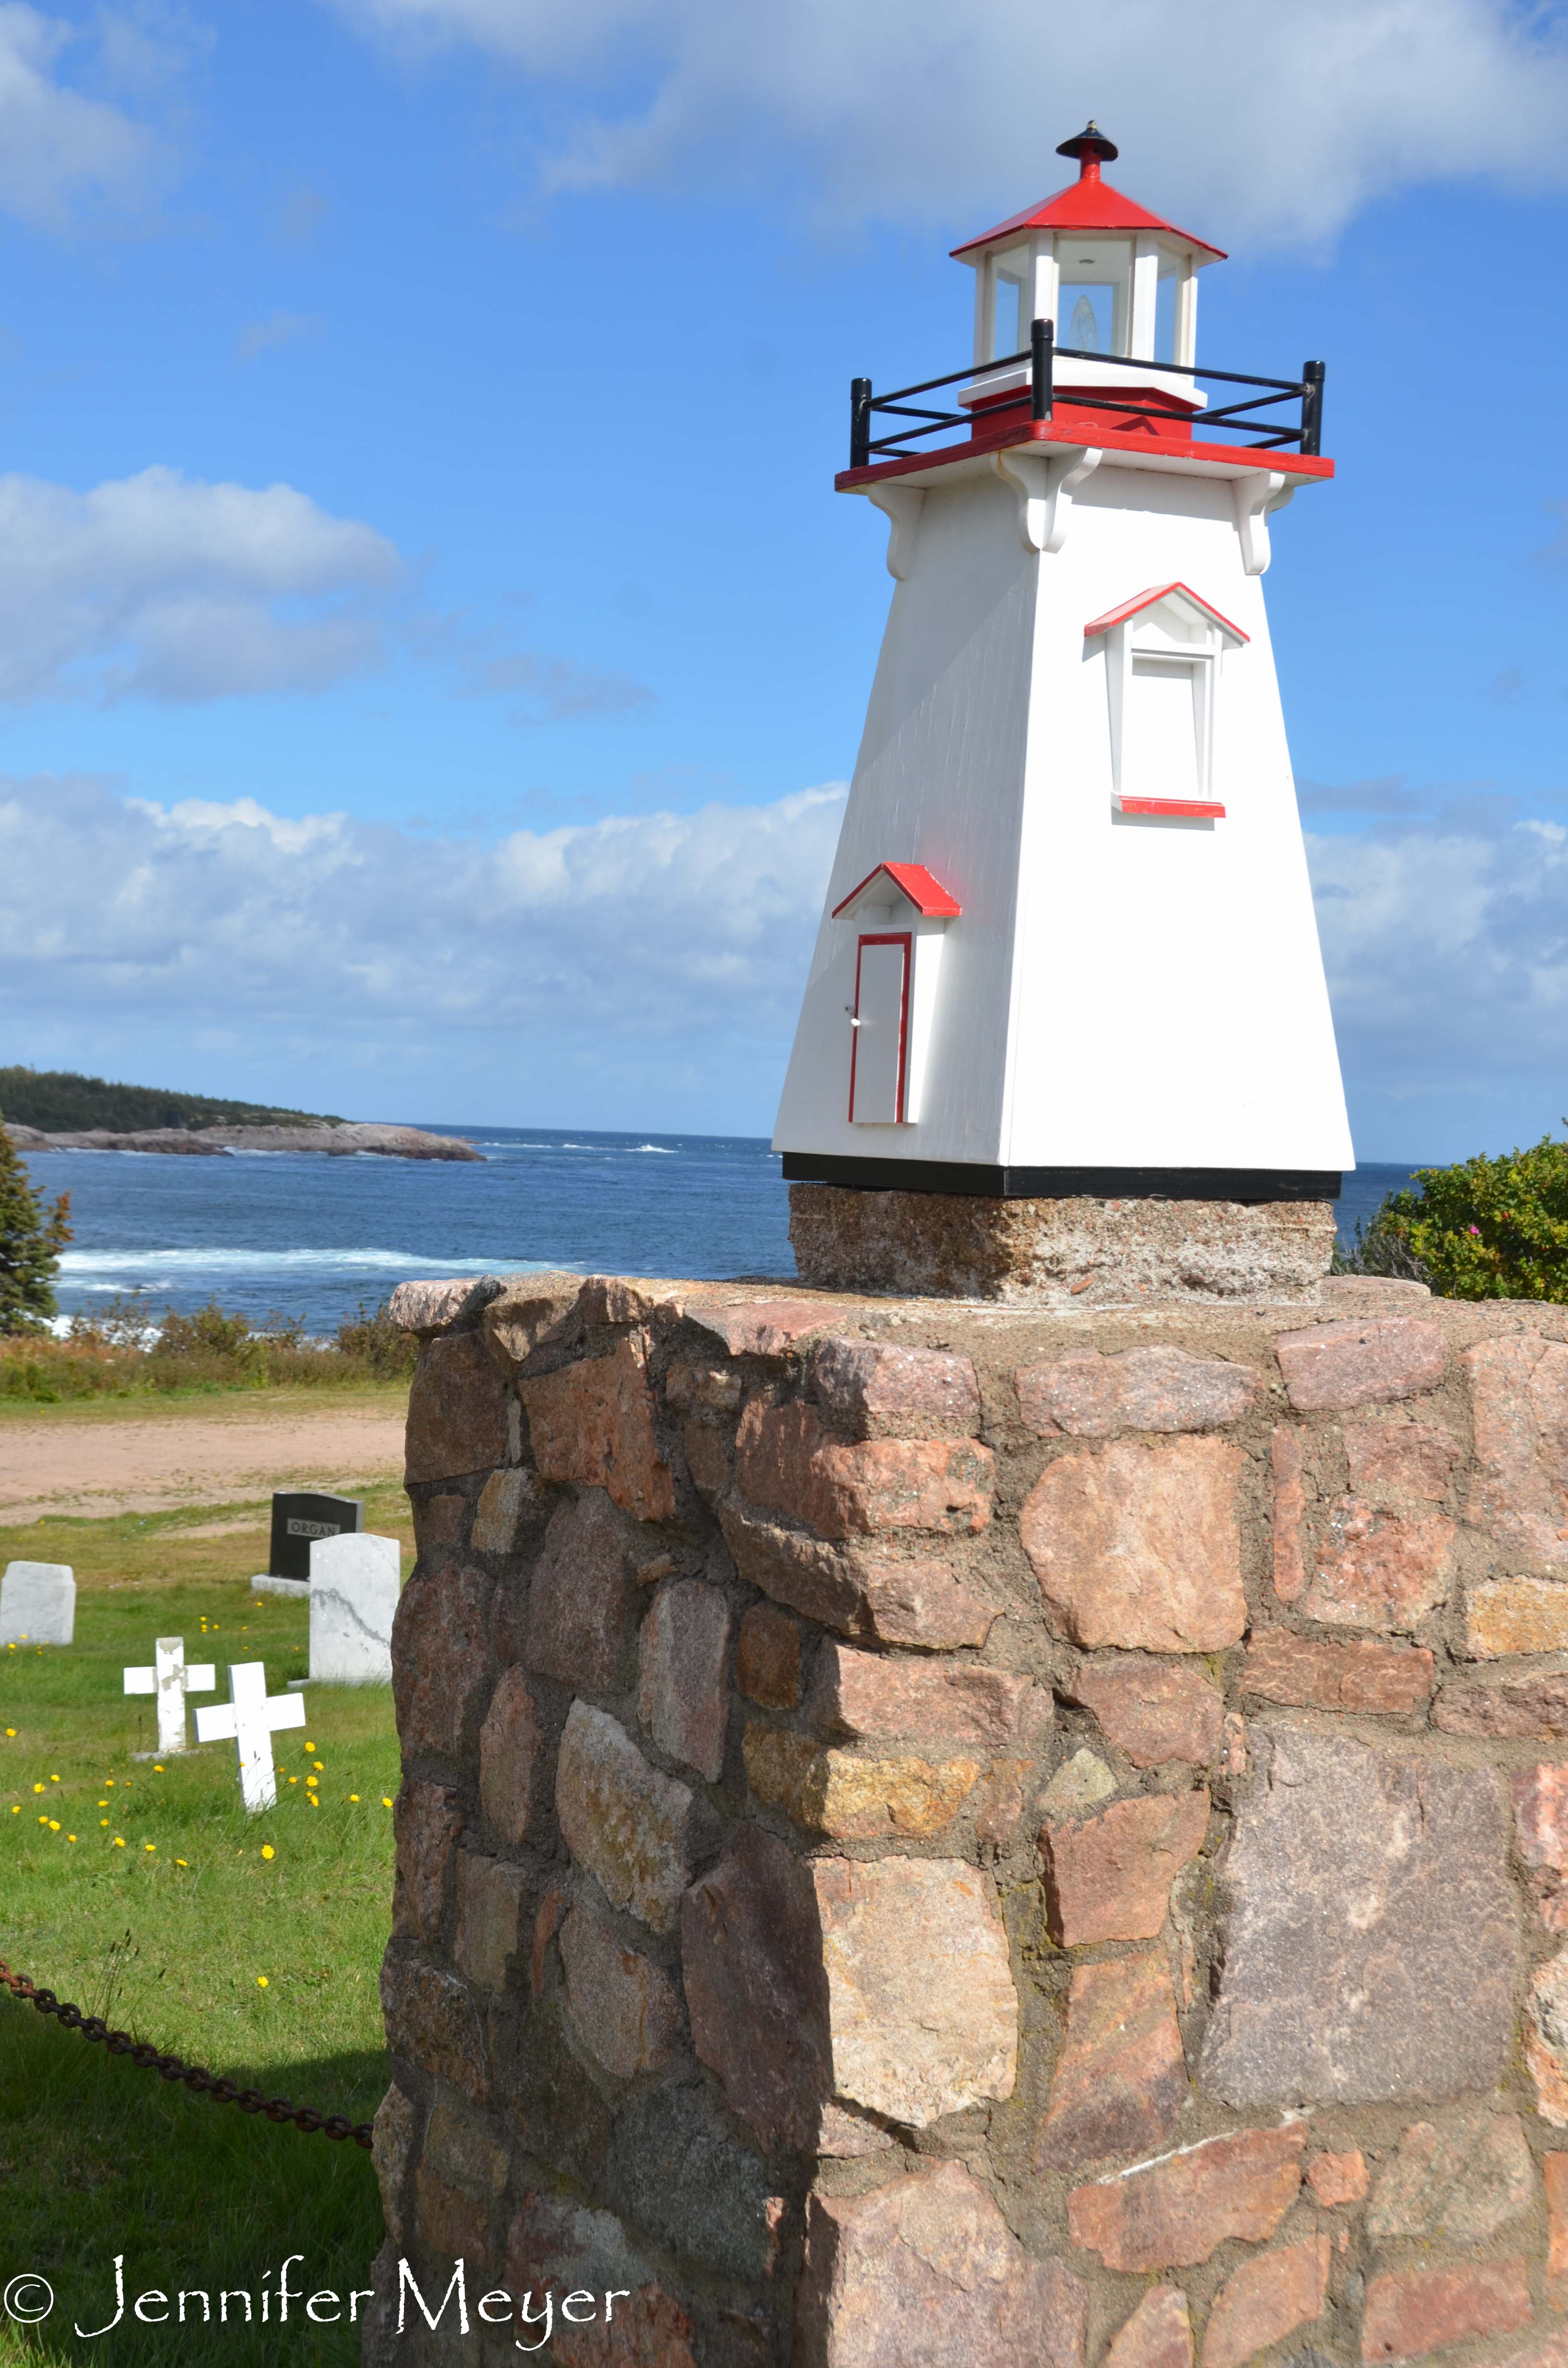 This cemetery by the sea had a little lighthouse.